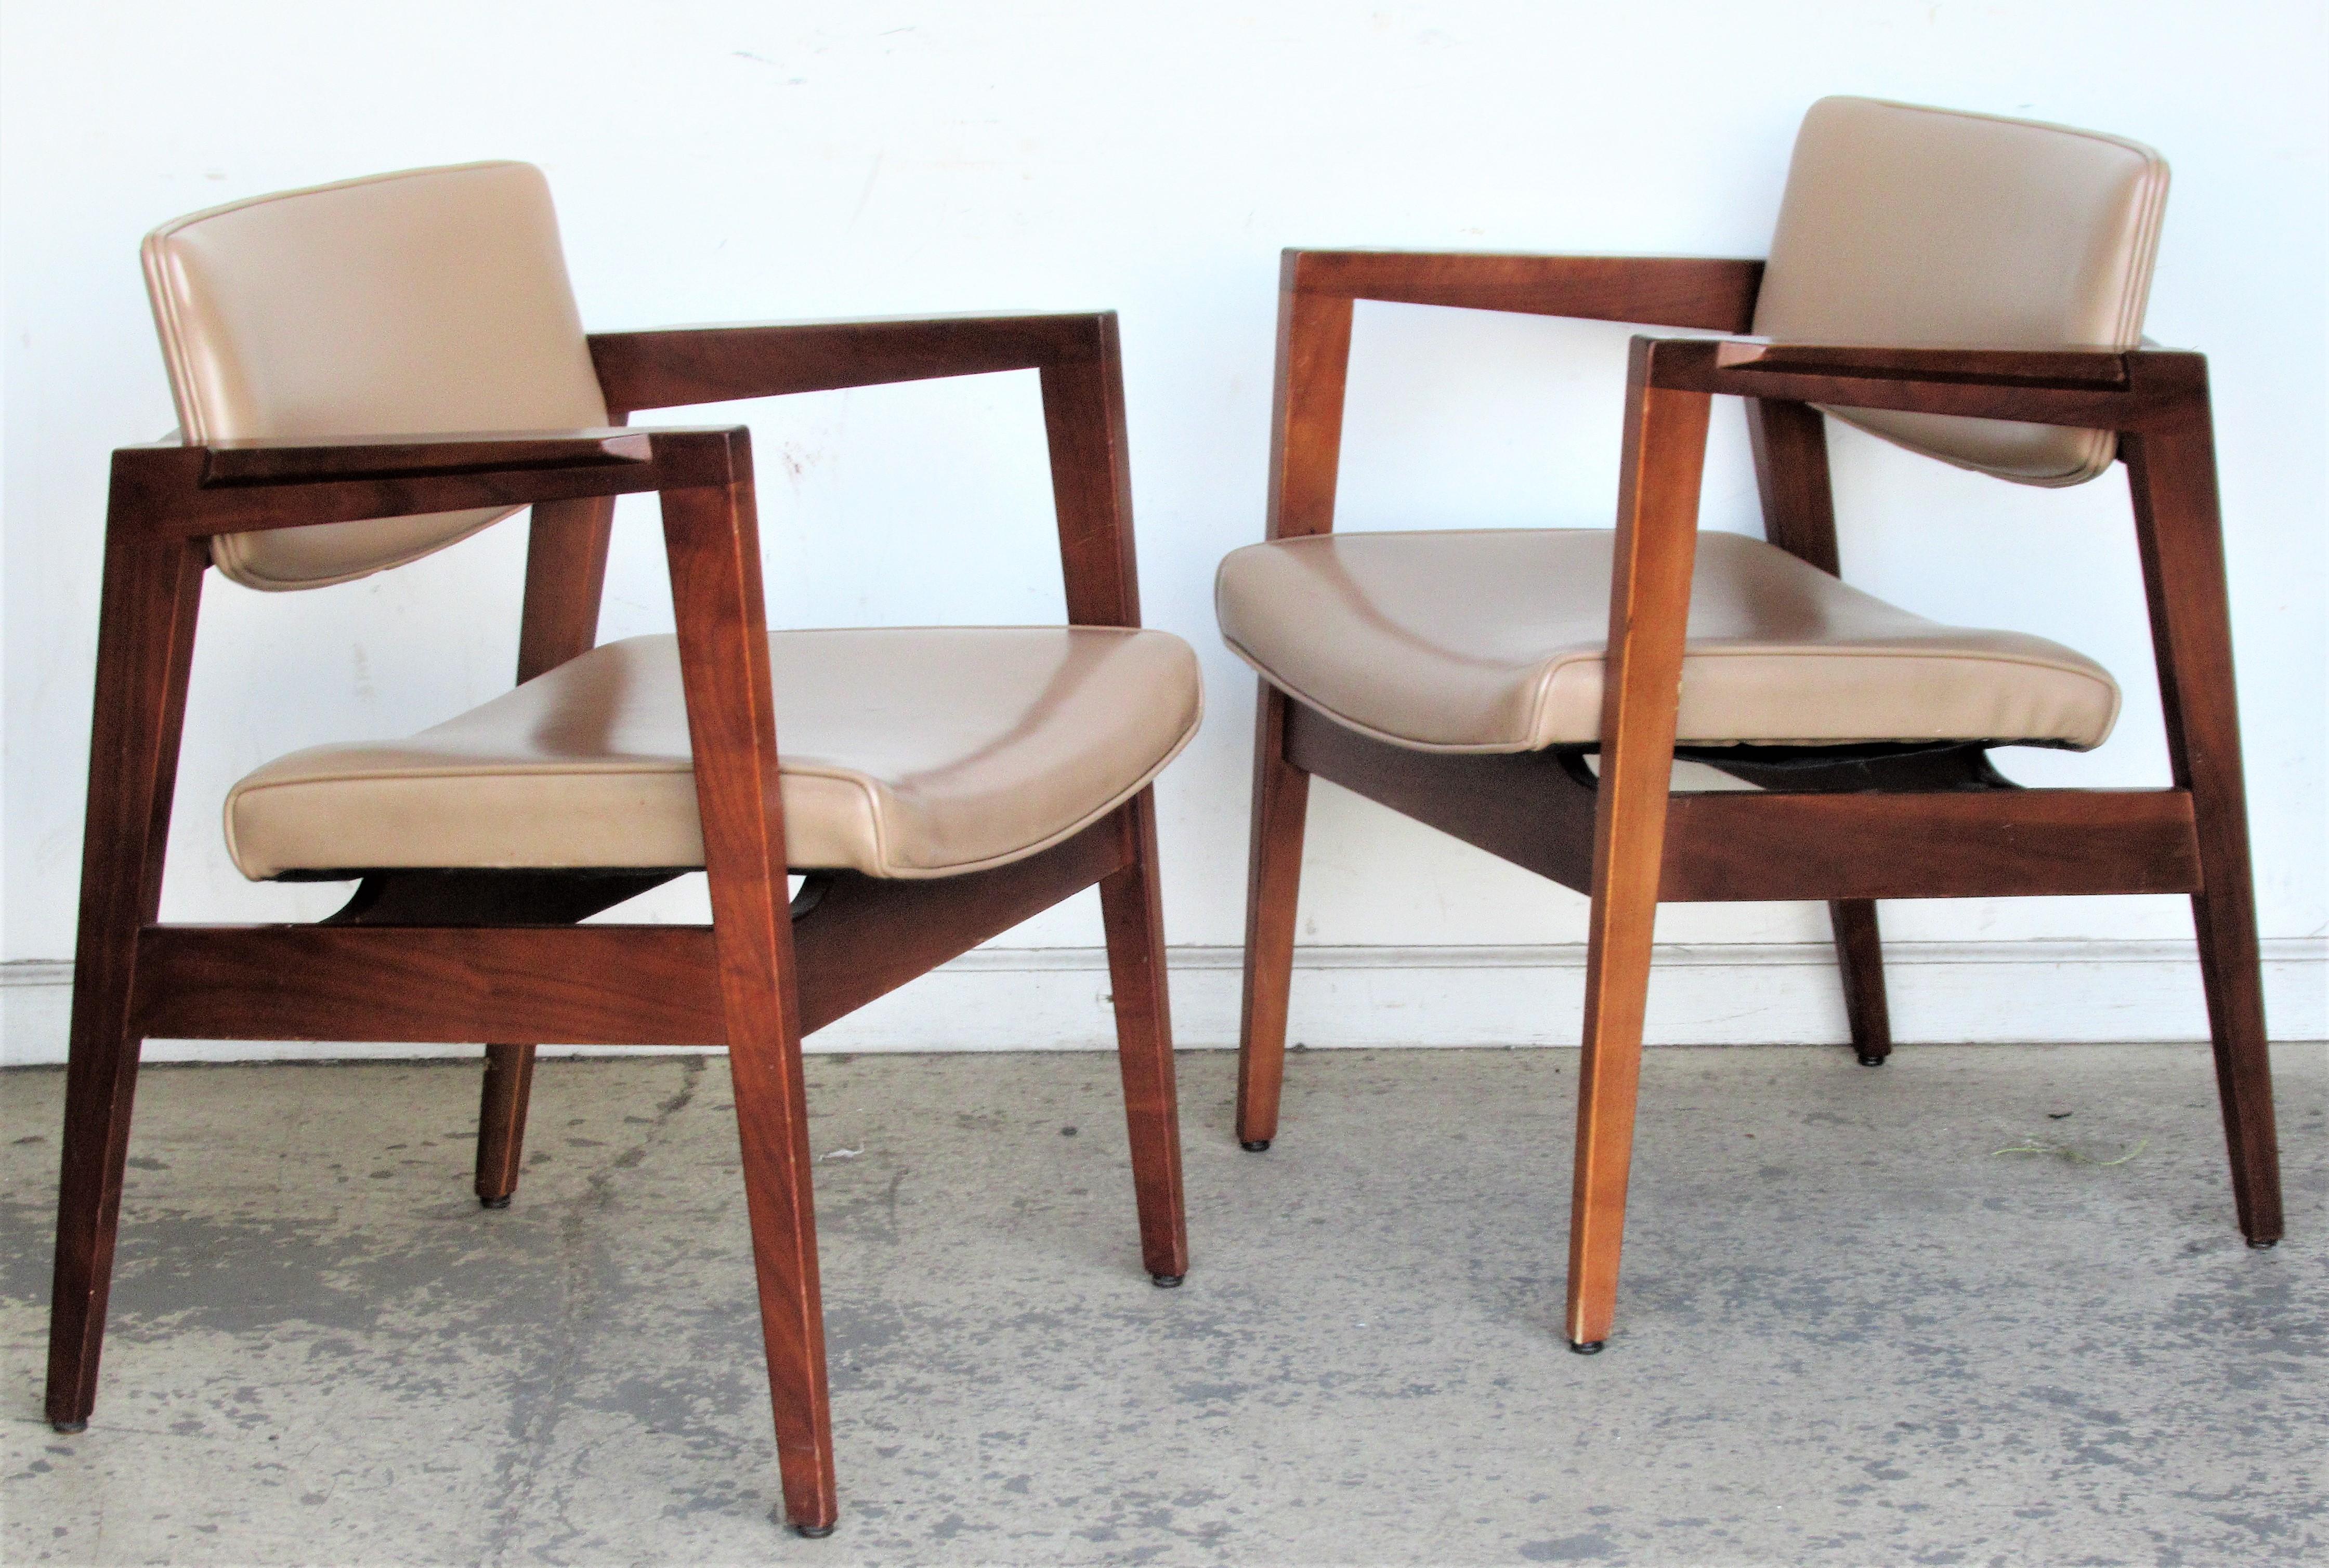 By Gunlocke, all original matching set of six classic mid century modern walnut armchairs / lounge chairs with floating seats and a great angular form. In the style of Jens Risom. Circa 1960. Look at all pictures and read condition report in comment